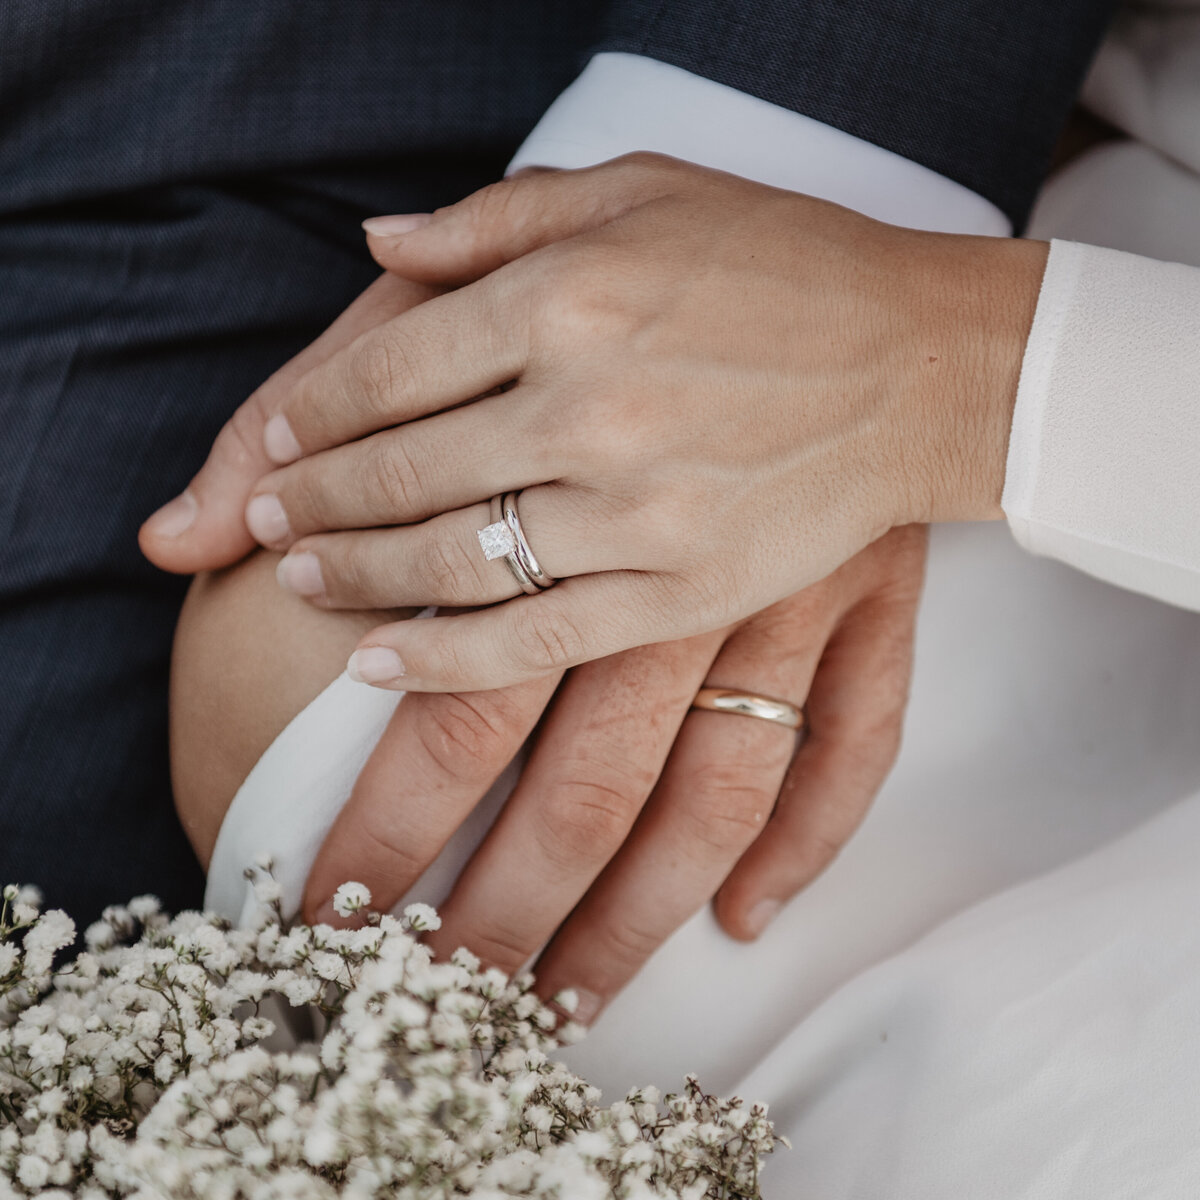 jackson wyoming photographer captures detail shot of bride and groom's hands holding each other and showing their wedding rings